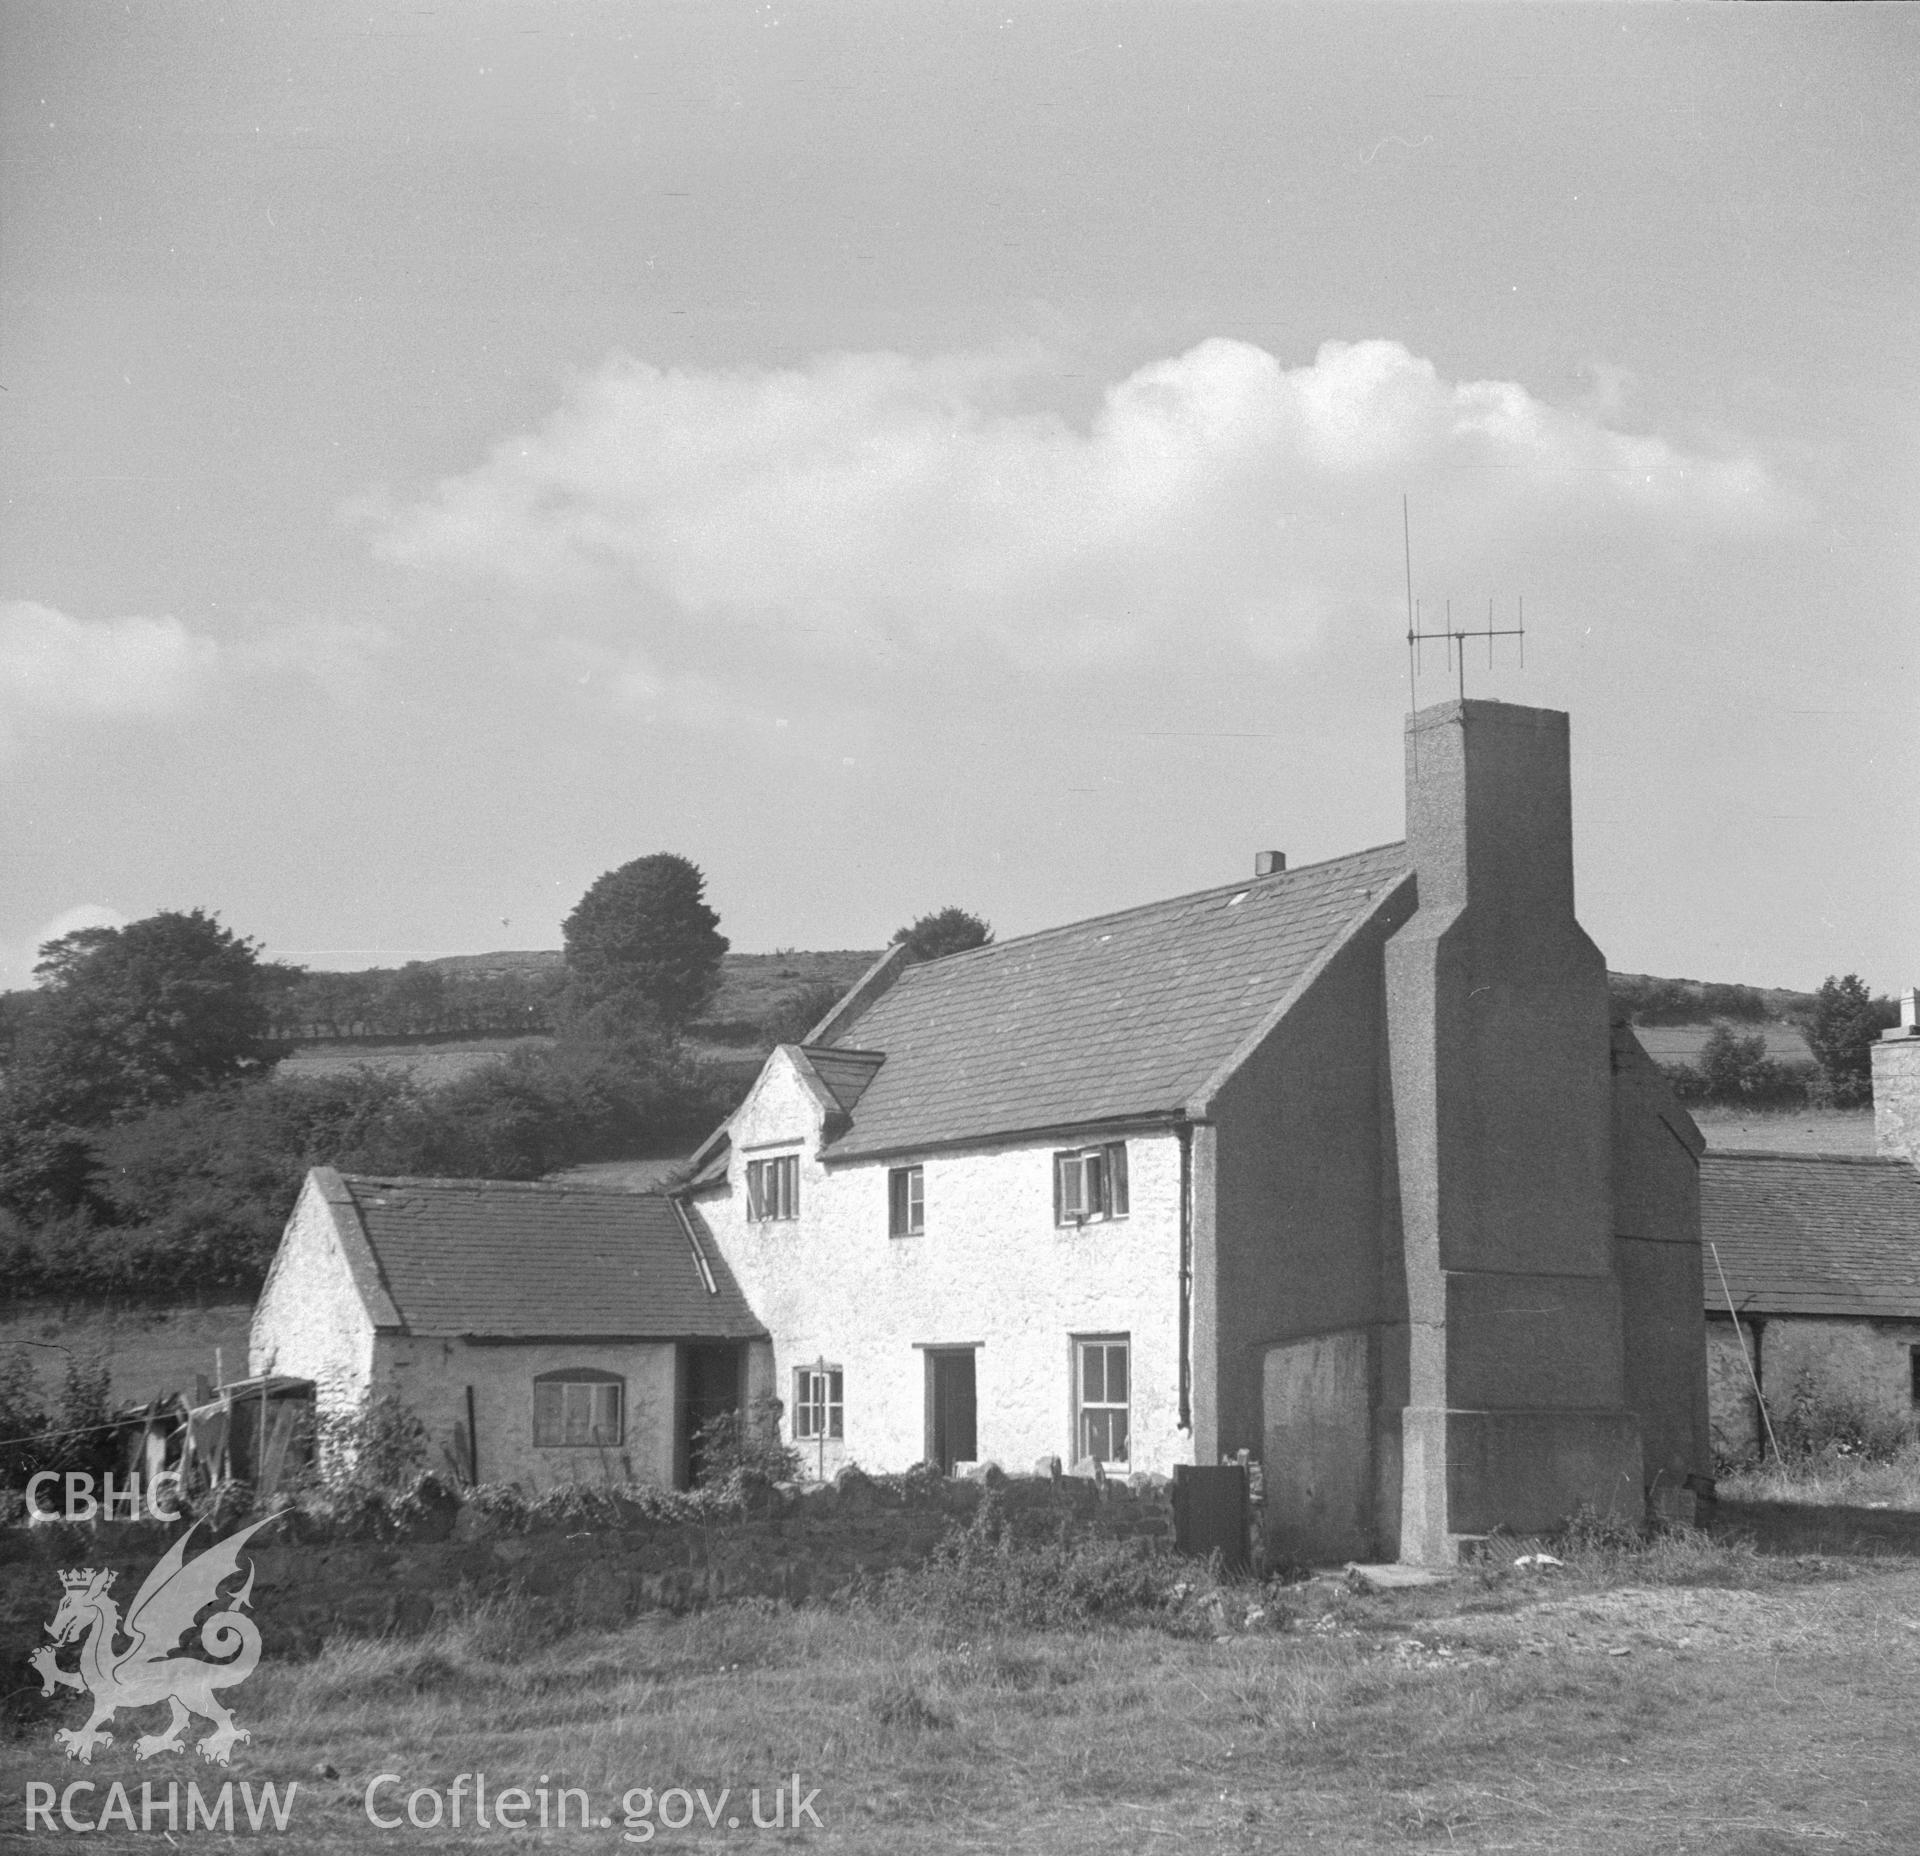 Digital copy of a black and white nitrate negative showing general view of Penyrorsedd Farmhouse.